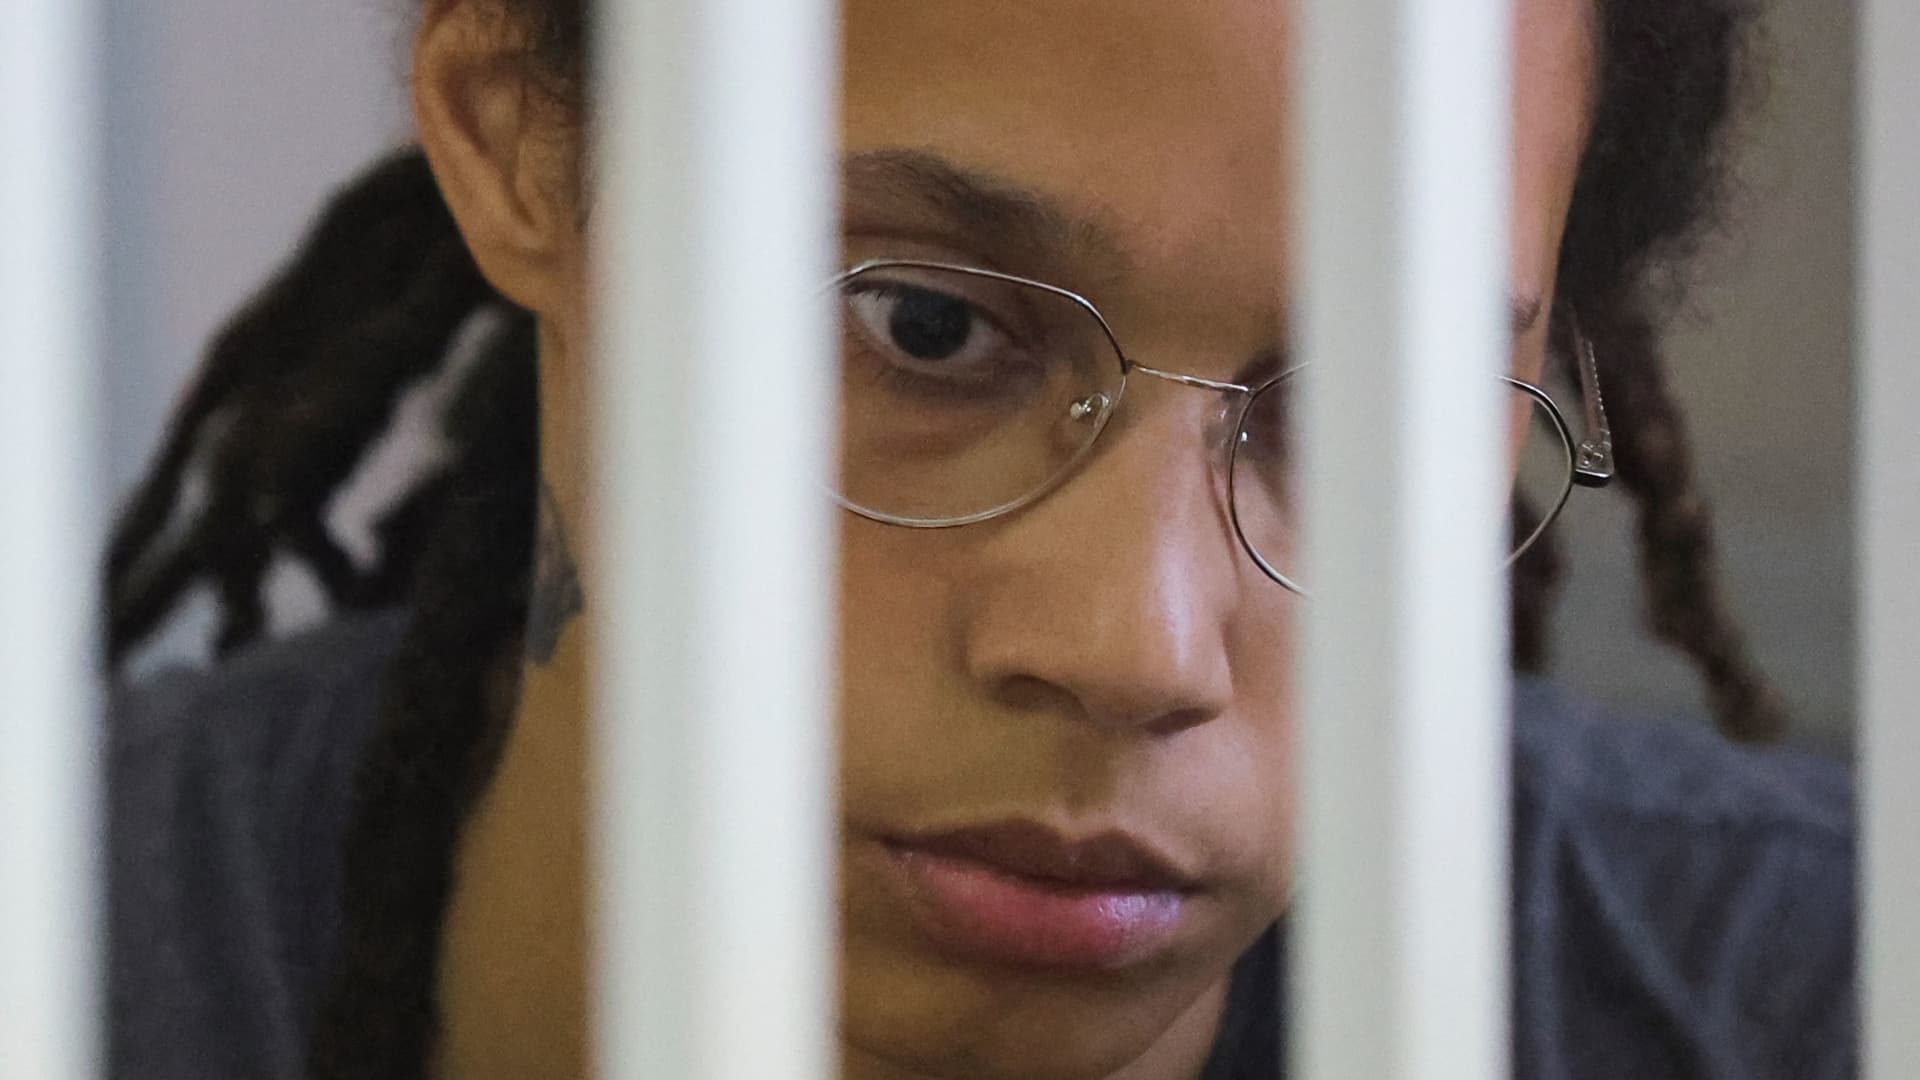 US' Women's National Basketball Association (NBA) basketball player Brittney Griner, who was detained at Moscow's Sheremetyevo airport and later charged with illegal possession of cannabis, waits for the verdict inside a defendants' cage before a court hearing in Khimki outside Moscow, on August 4, 2022.